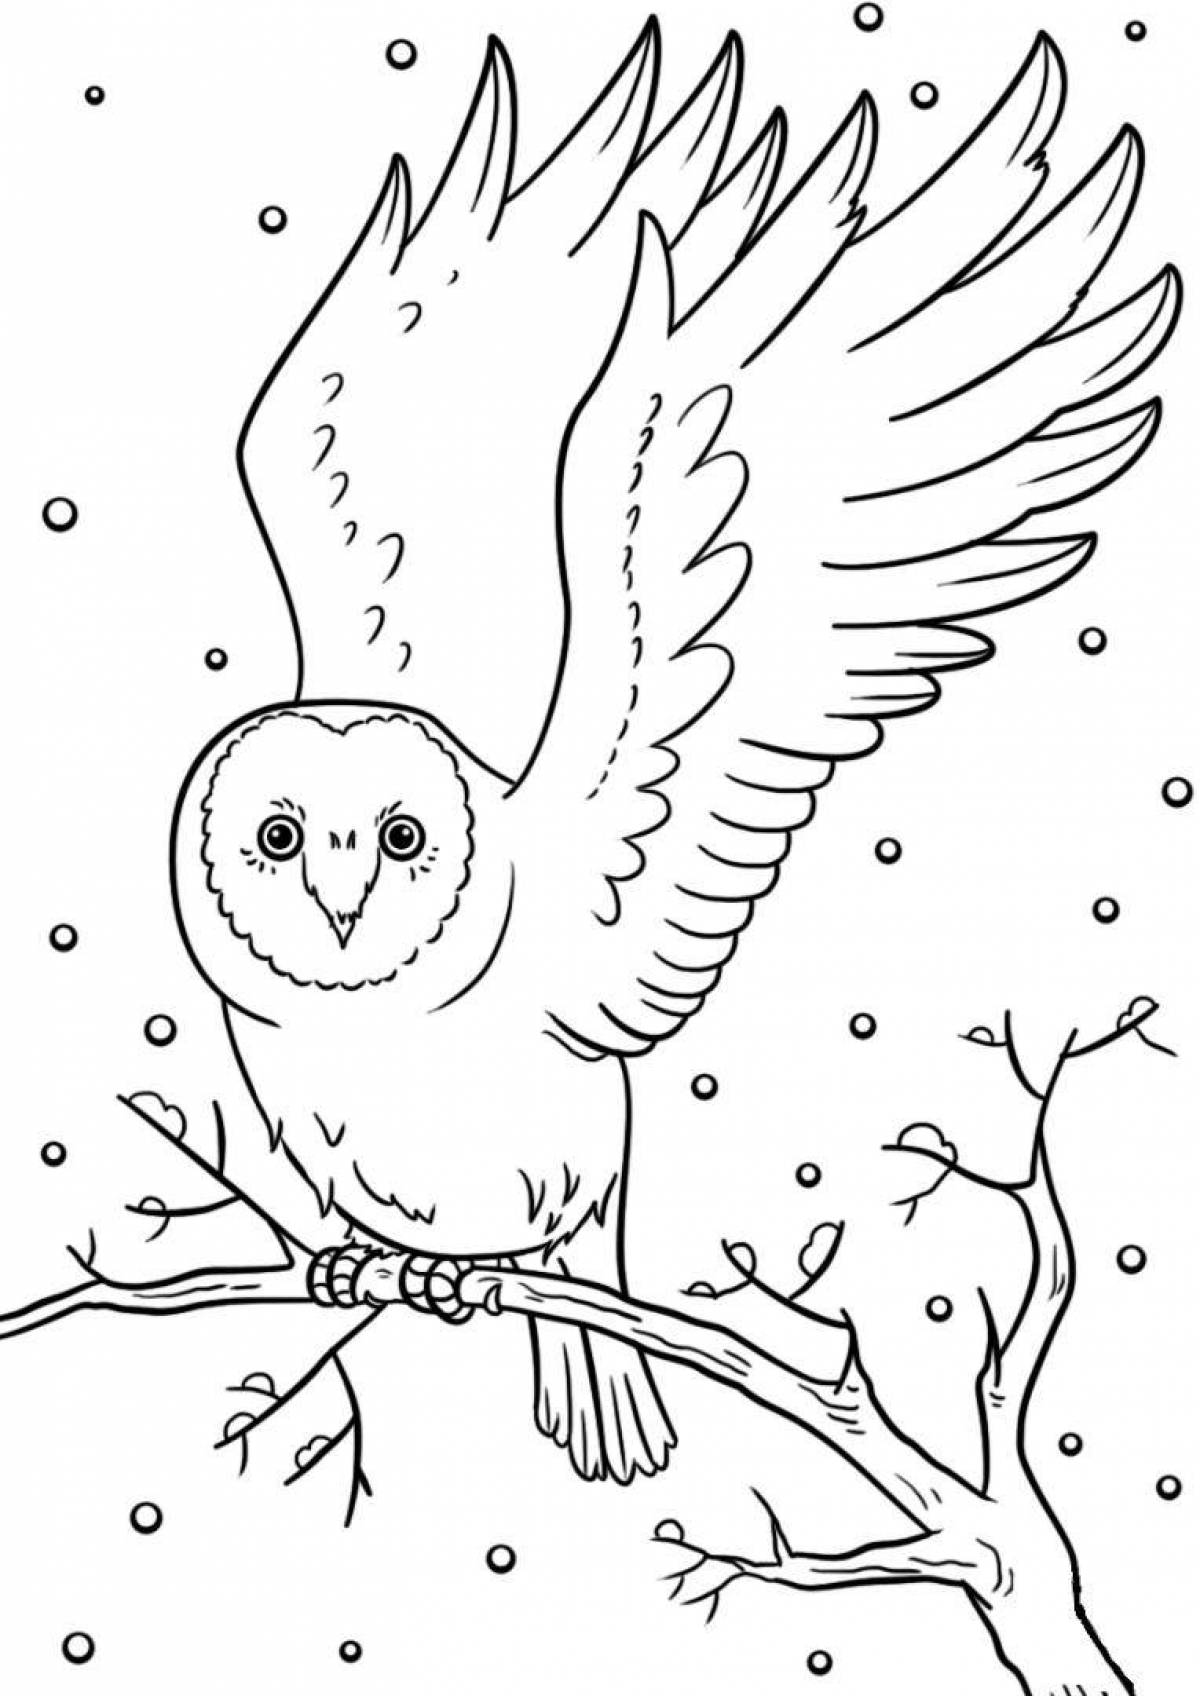 Coloring book magical bird for children 5-6 years old